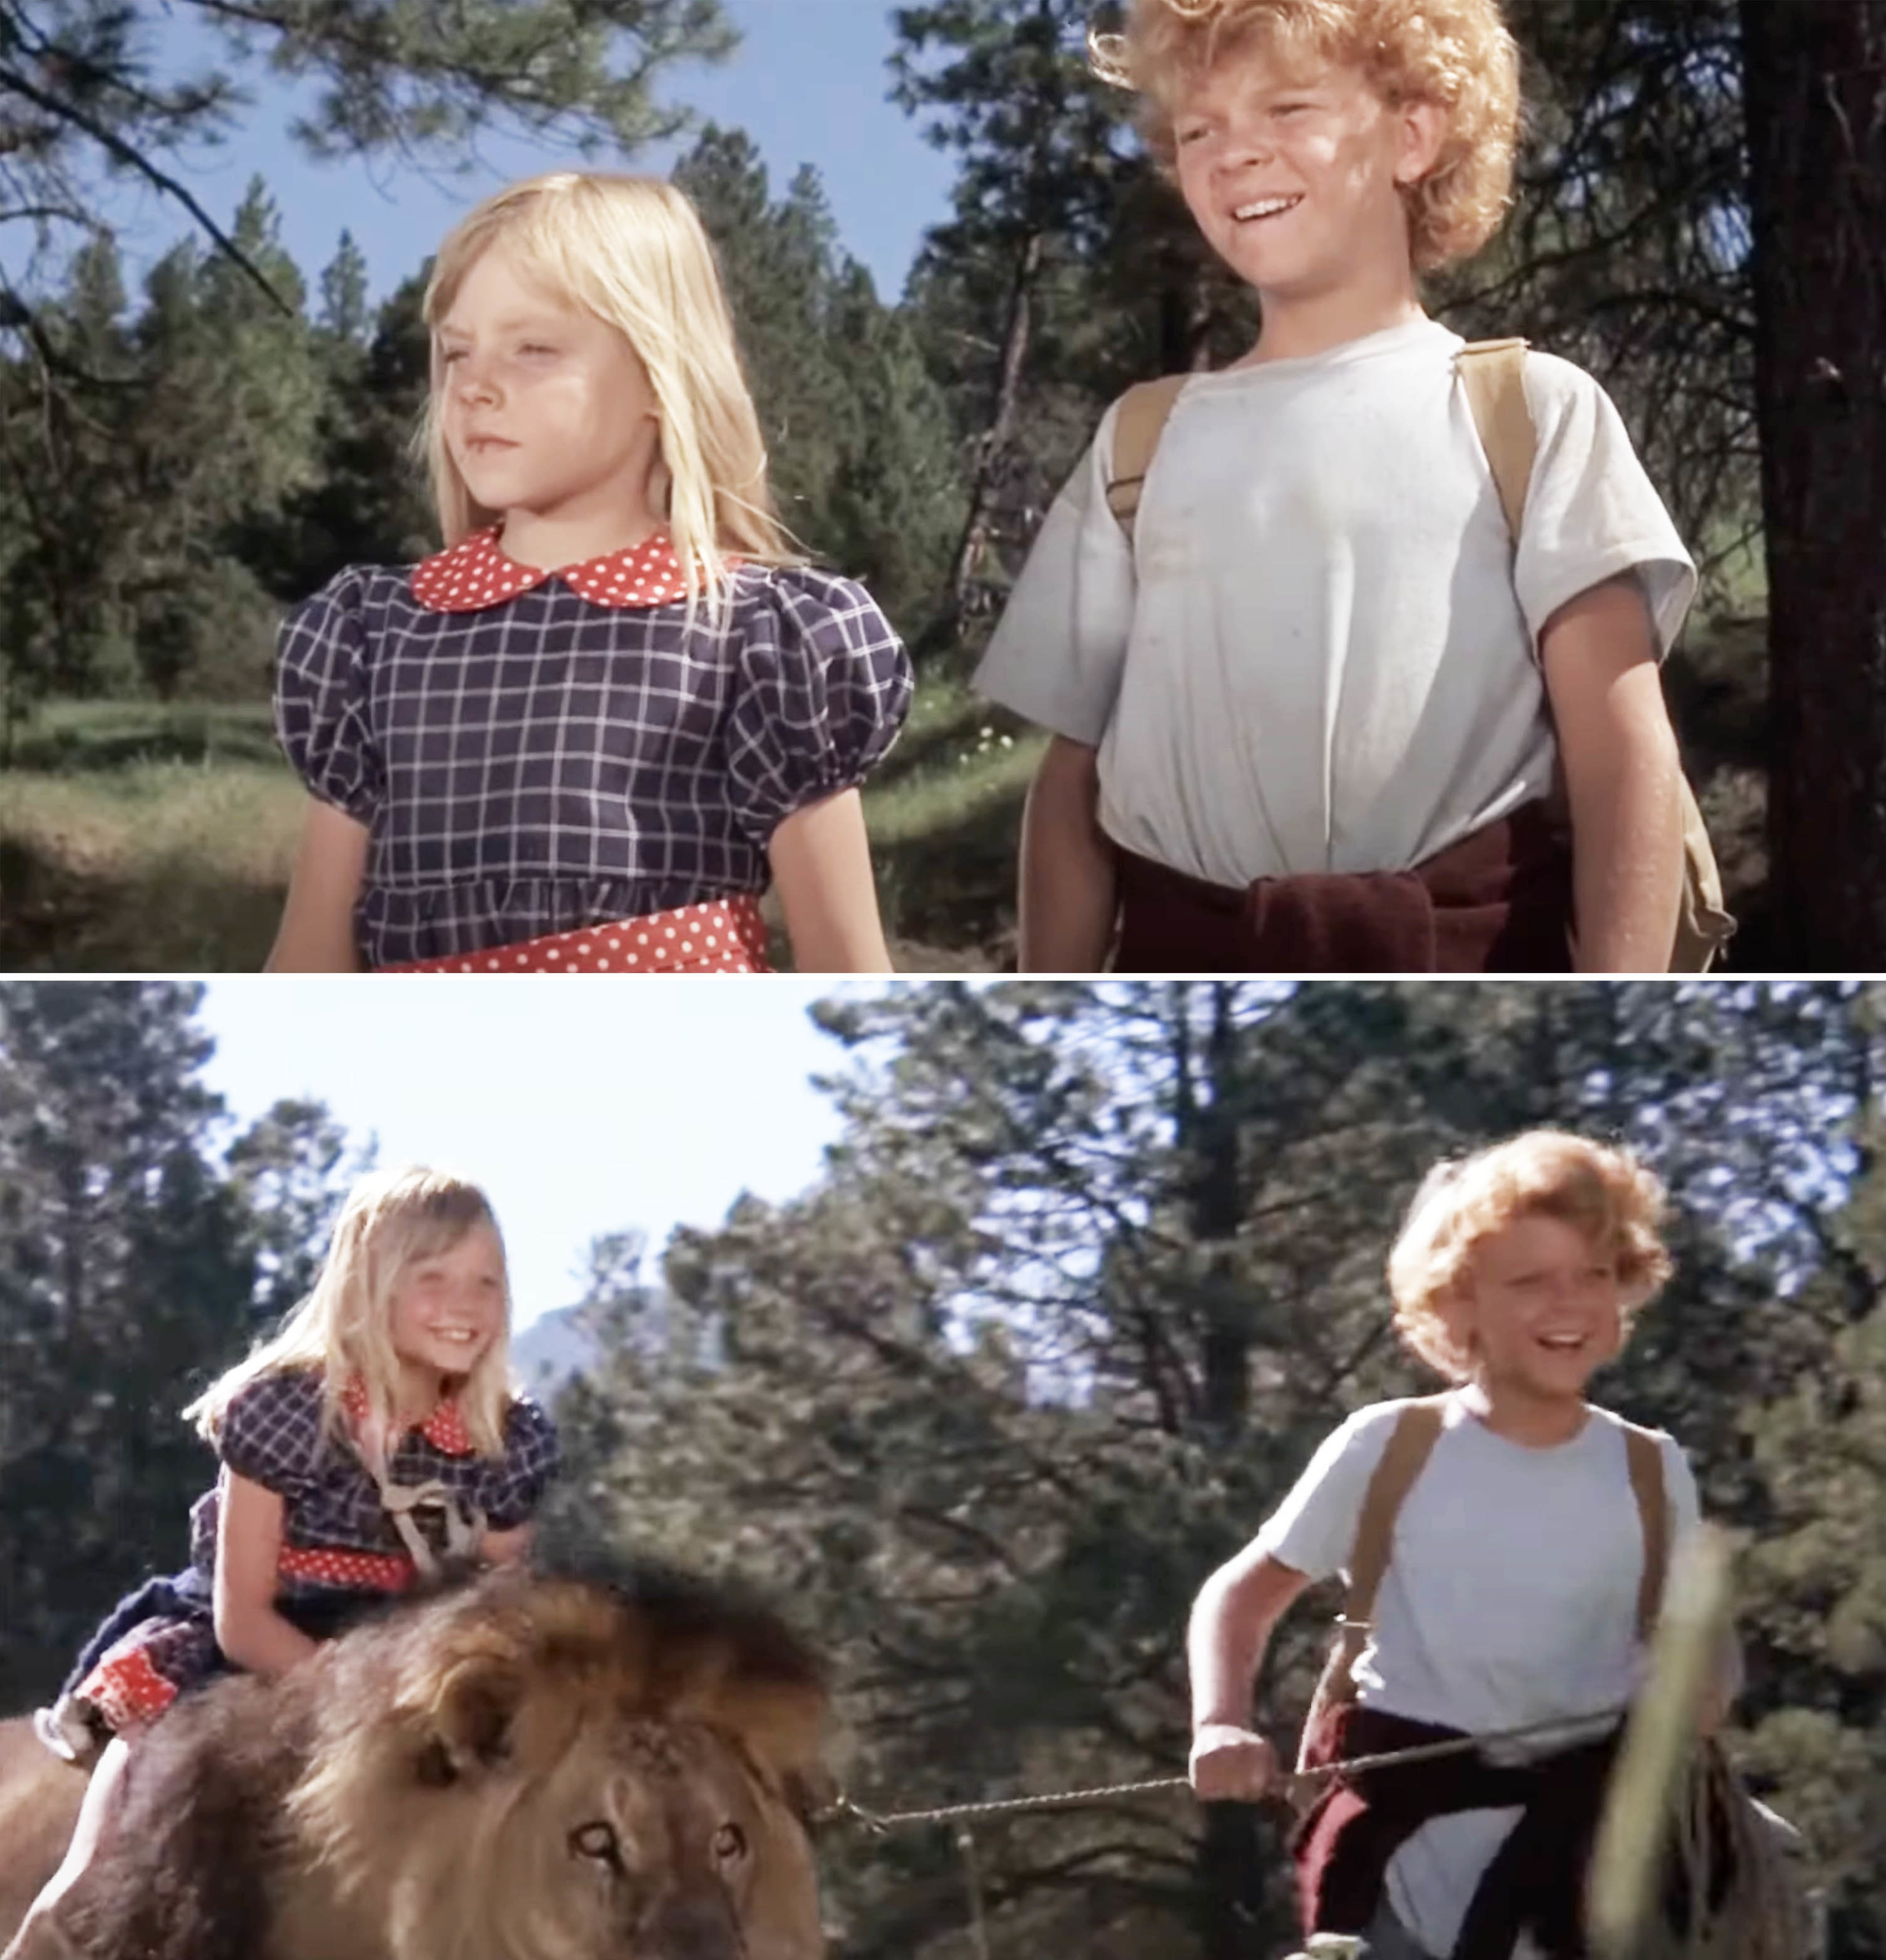 Two scenes from a film with child characters, one being portrayed by Jodie Foster, and a lion